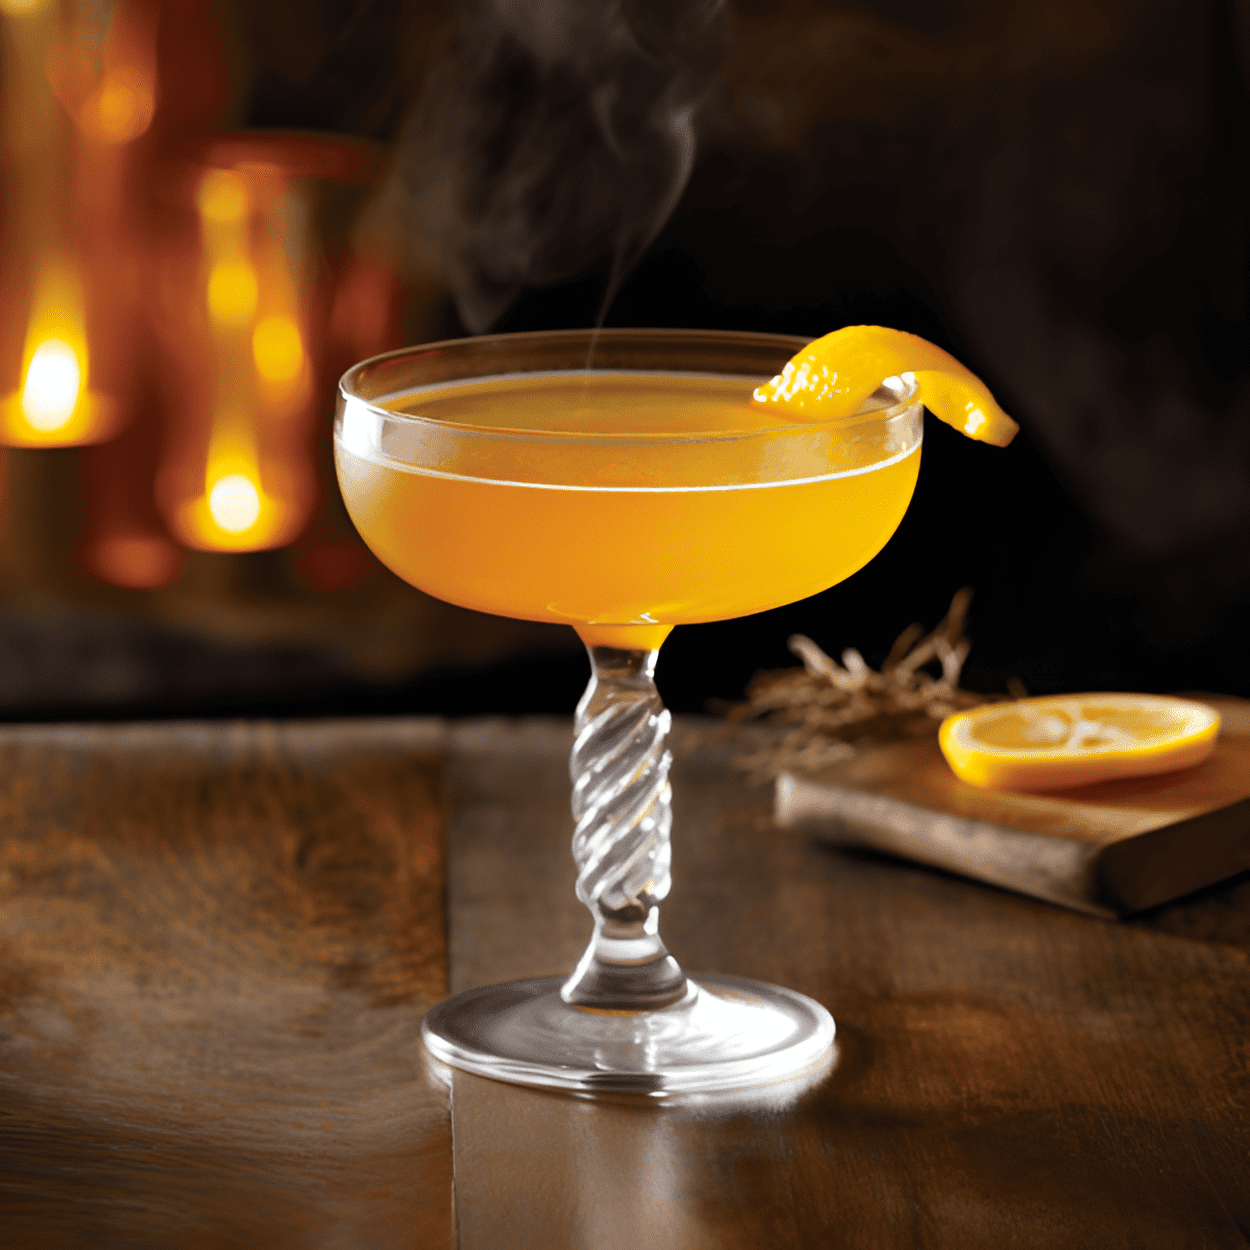 Bootlegger Cocktail Recipe - The Bootlegger is a strong, robust cocktail with a sweet, fruity undertone. The bourbon gives it a rich, full-bodied flavor, while the lemon juice adds a refreshing tartness. The simple syrup balances out the acidity, making it a well-rounded cocktail.